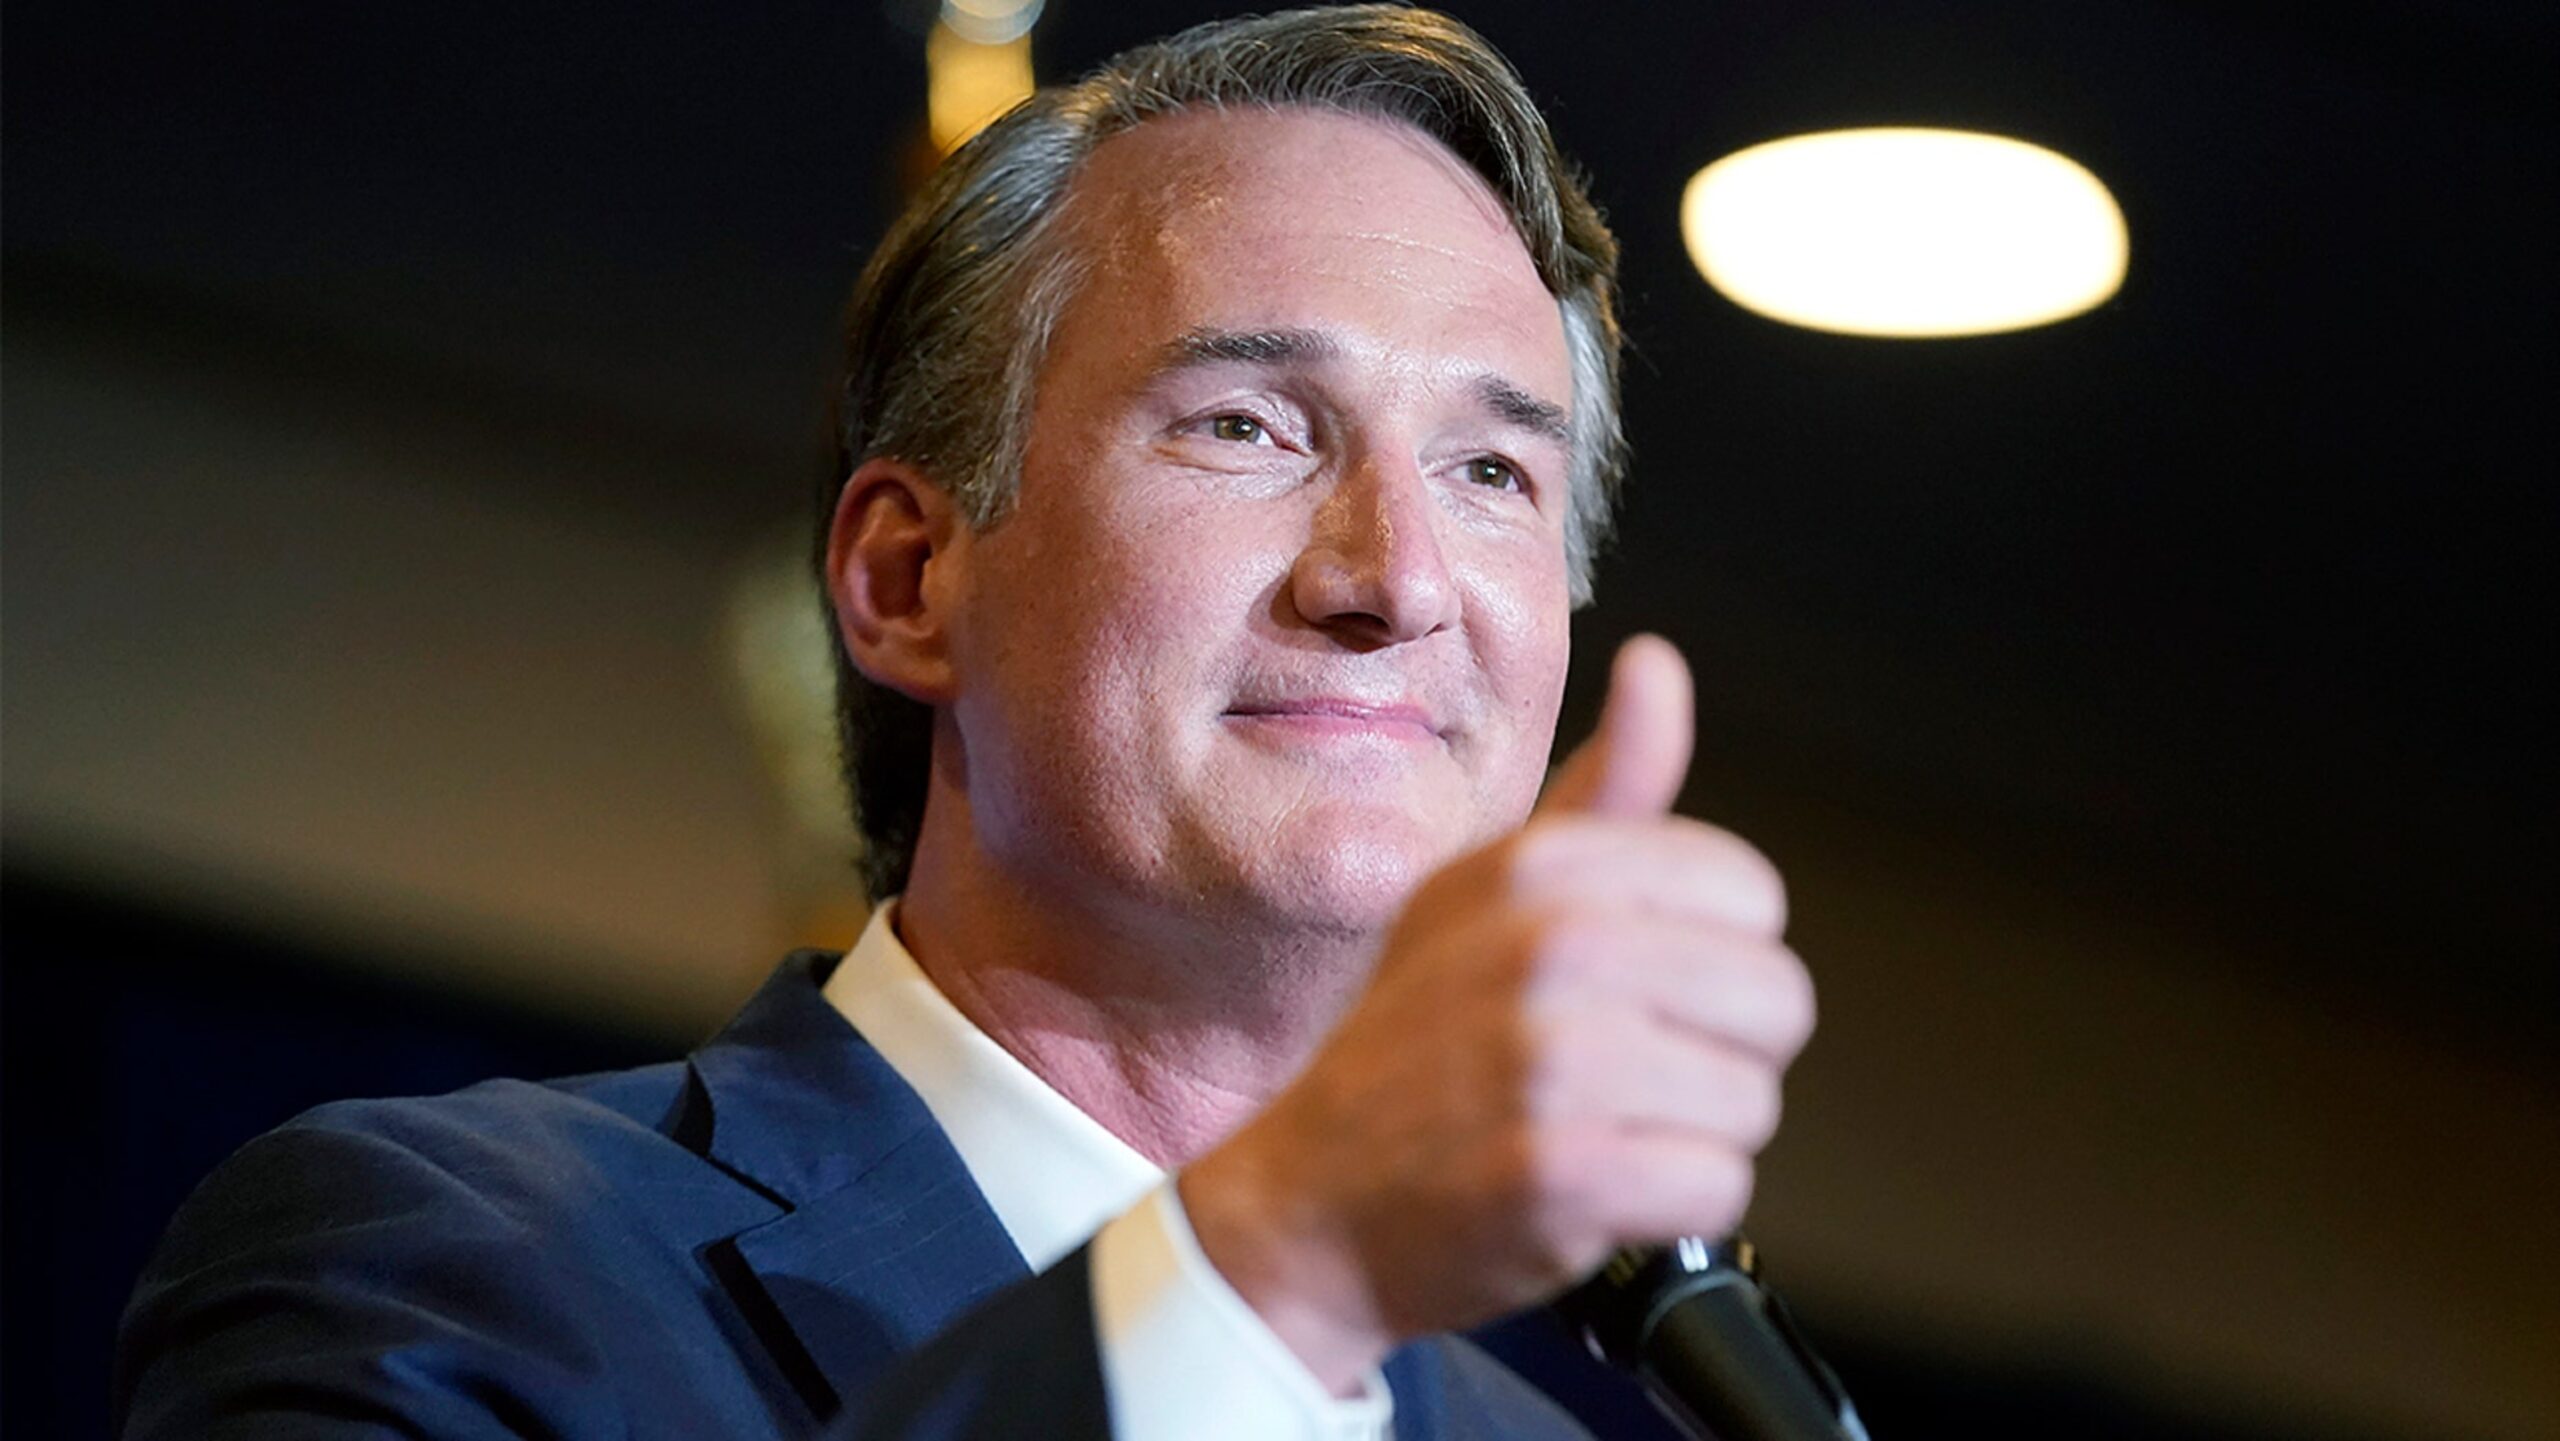 Glenn Youngkin, a white man with short gray hair in a suit, gives a thumbs up.